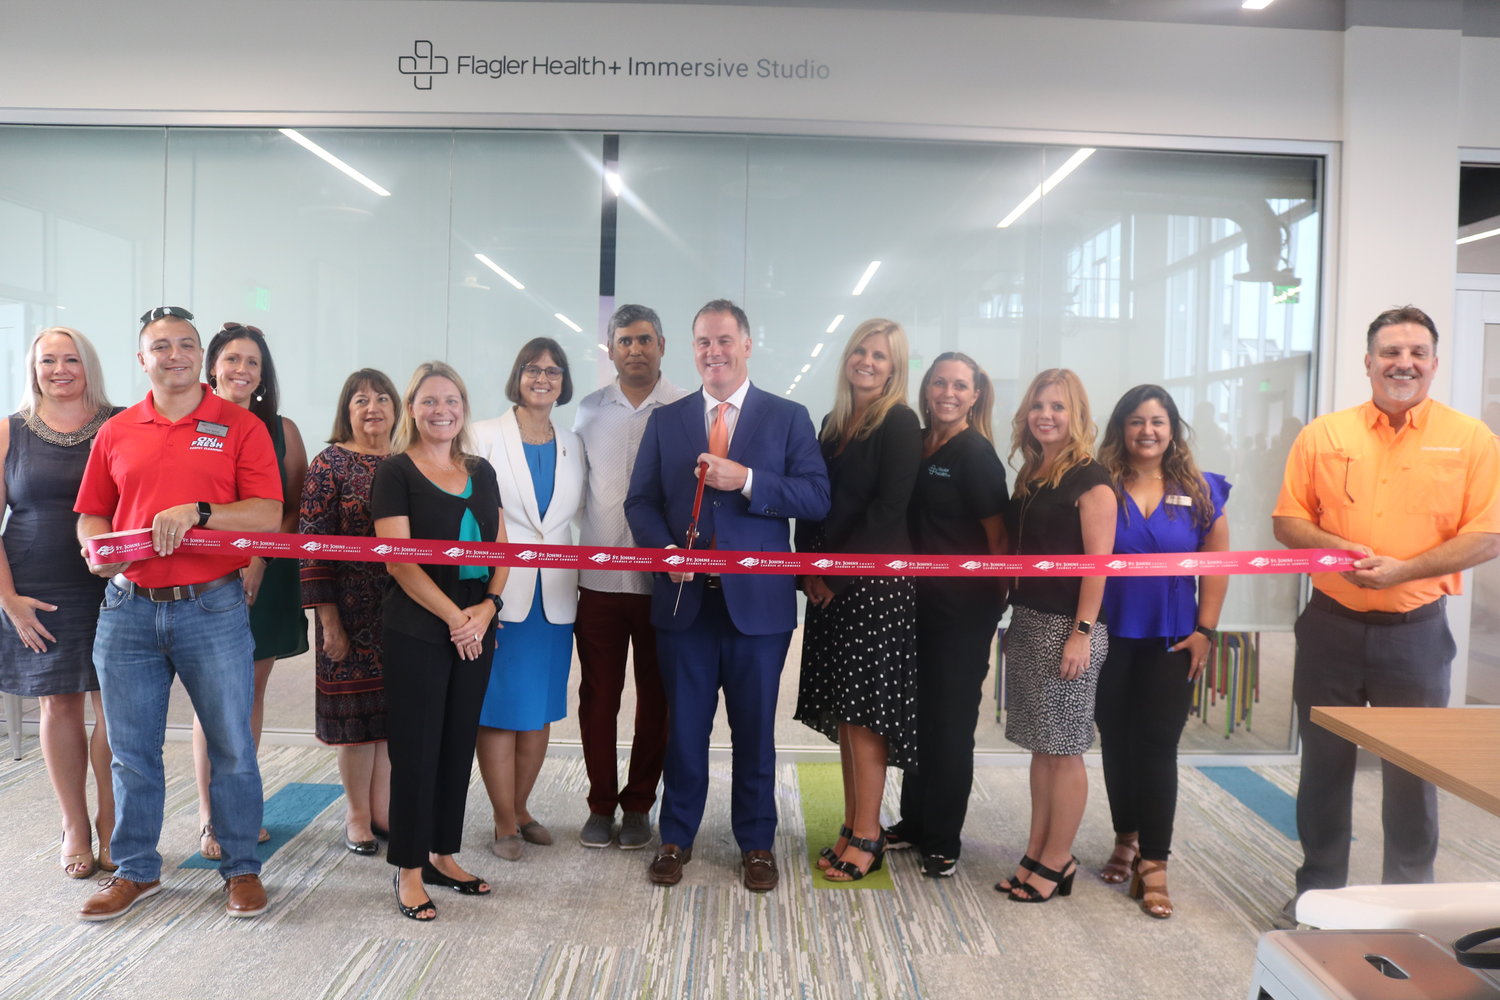 Flagler Health+ President and CEO Jason Barrett cuts the ribbon on the Flagler Health+ Immersive Studio during grand opening festivities for the link on Wednesday, July 14.